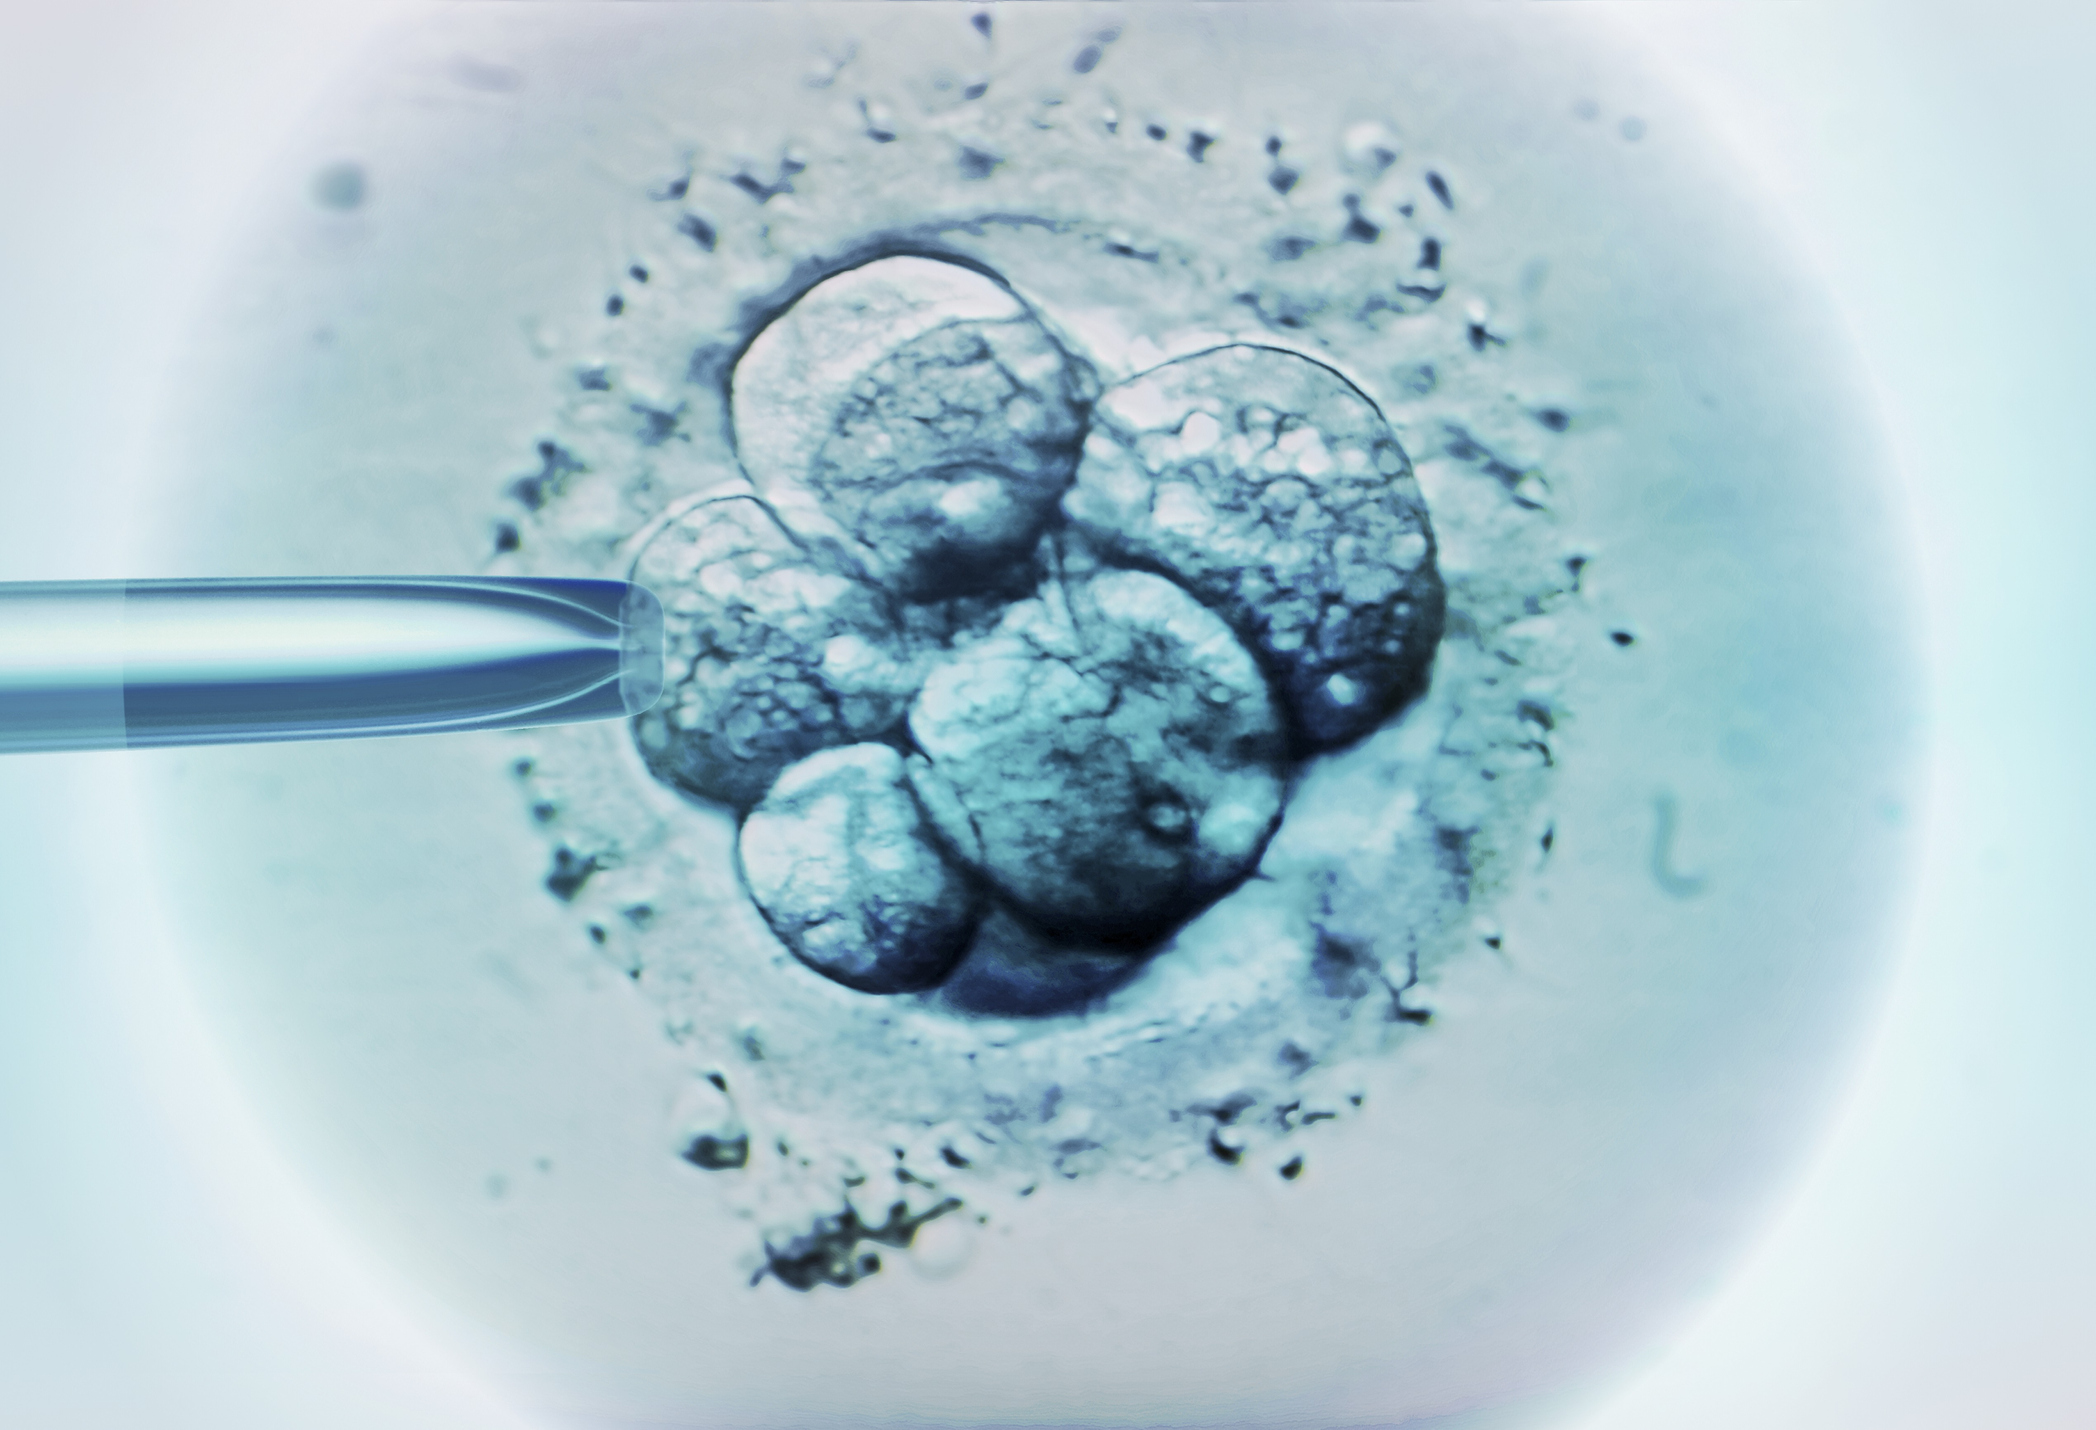 Virginia Judge Rules Embryos Are Property, ‘Chattel’ Using Slavery Law